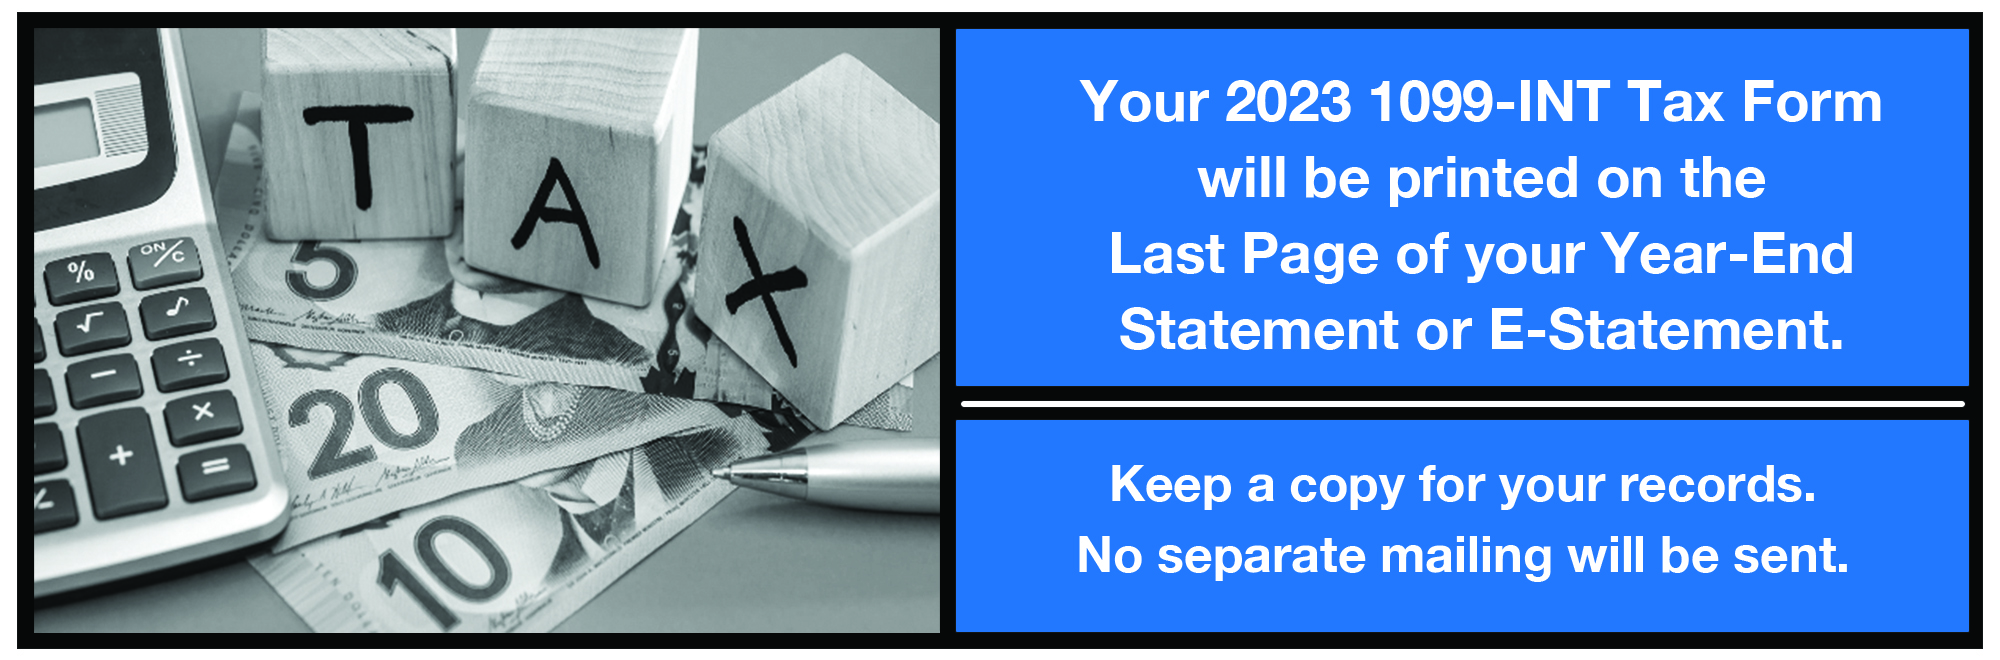 Your 2023 1099-int tax form will be printed on the last page of your year-end statement or e-statement.  keep a copy for your records.  No separate mailing will be sent.